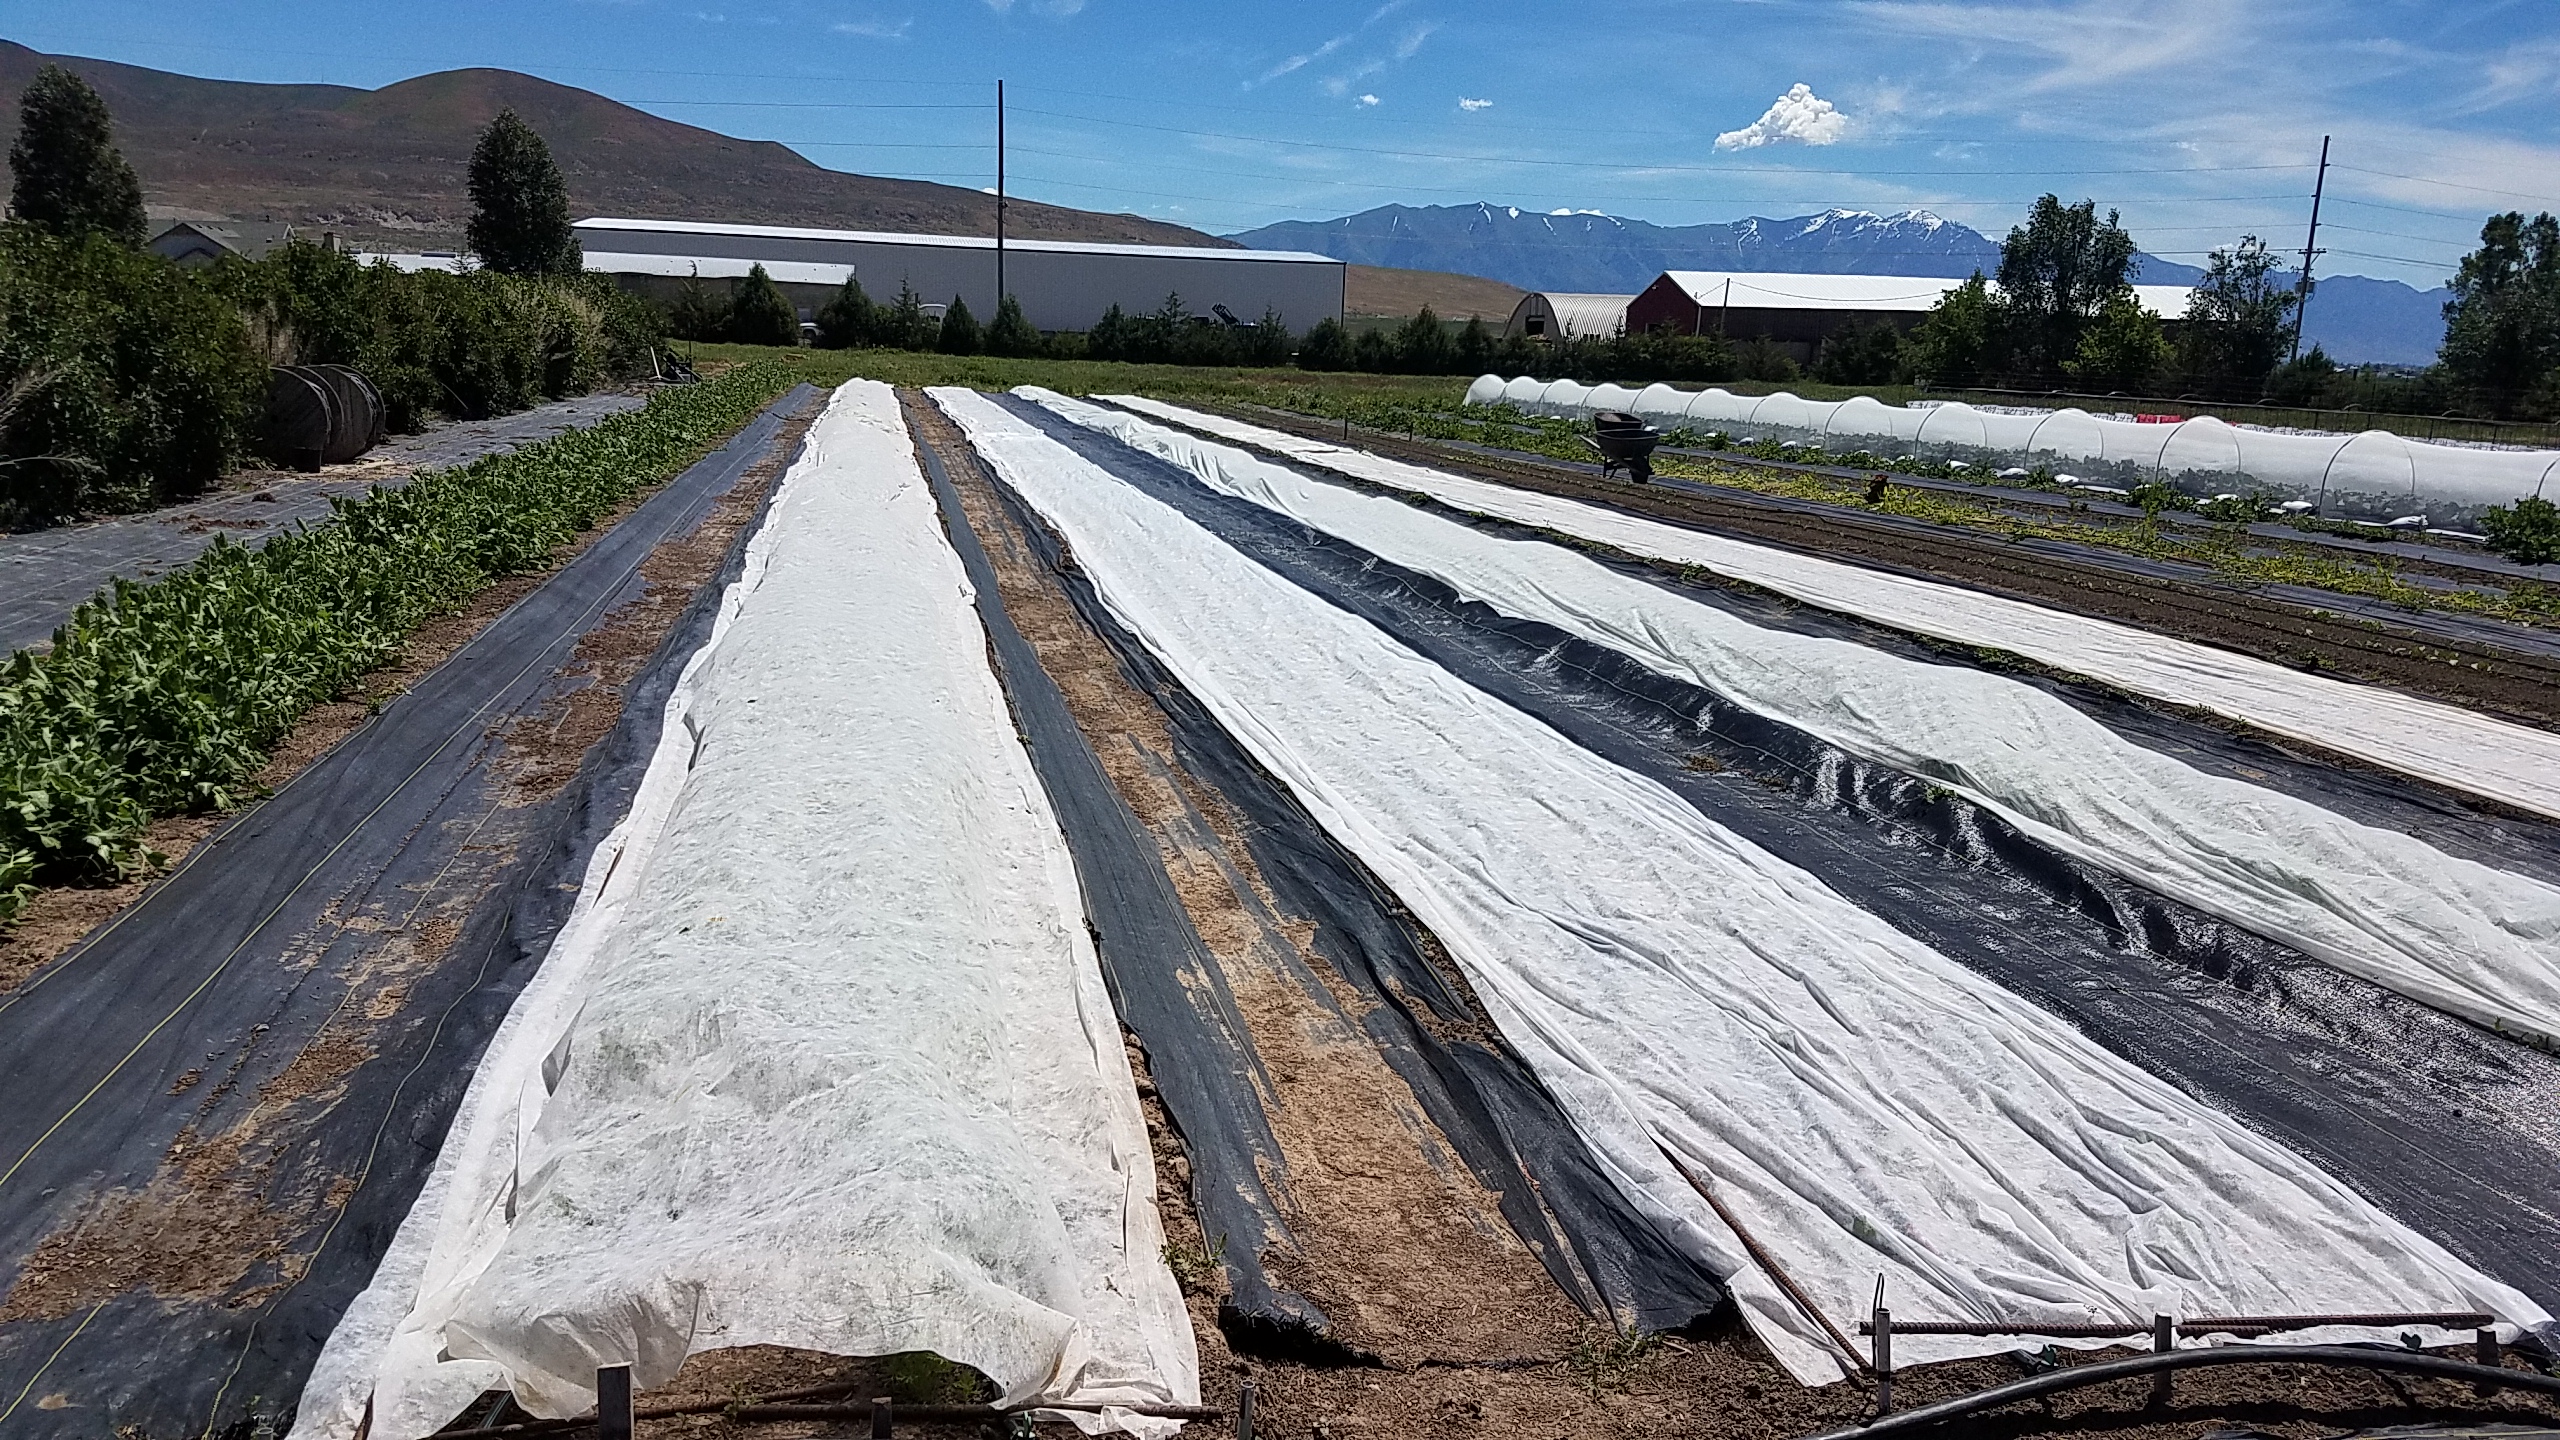 row covers laid directly on crops